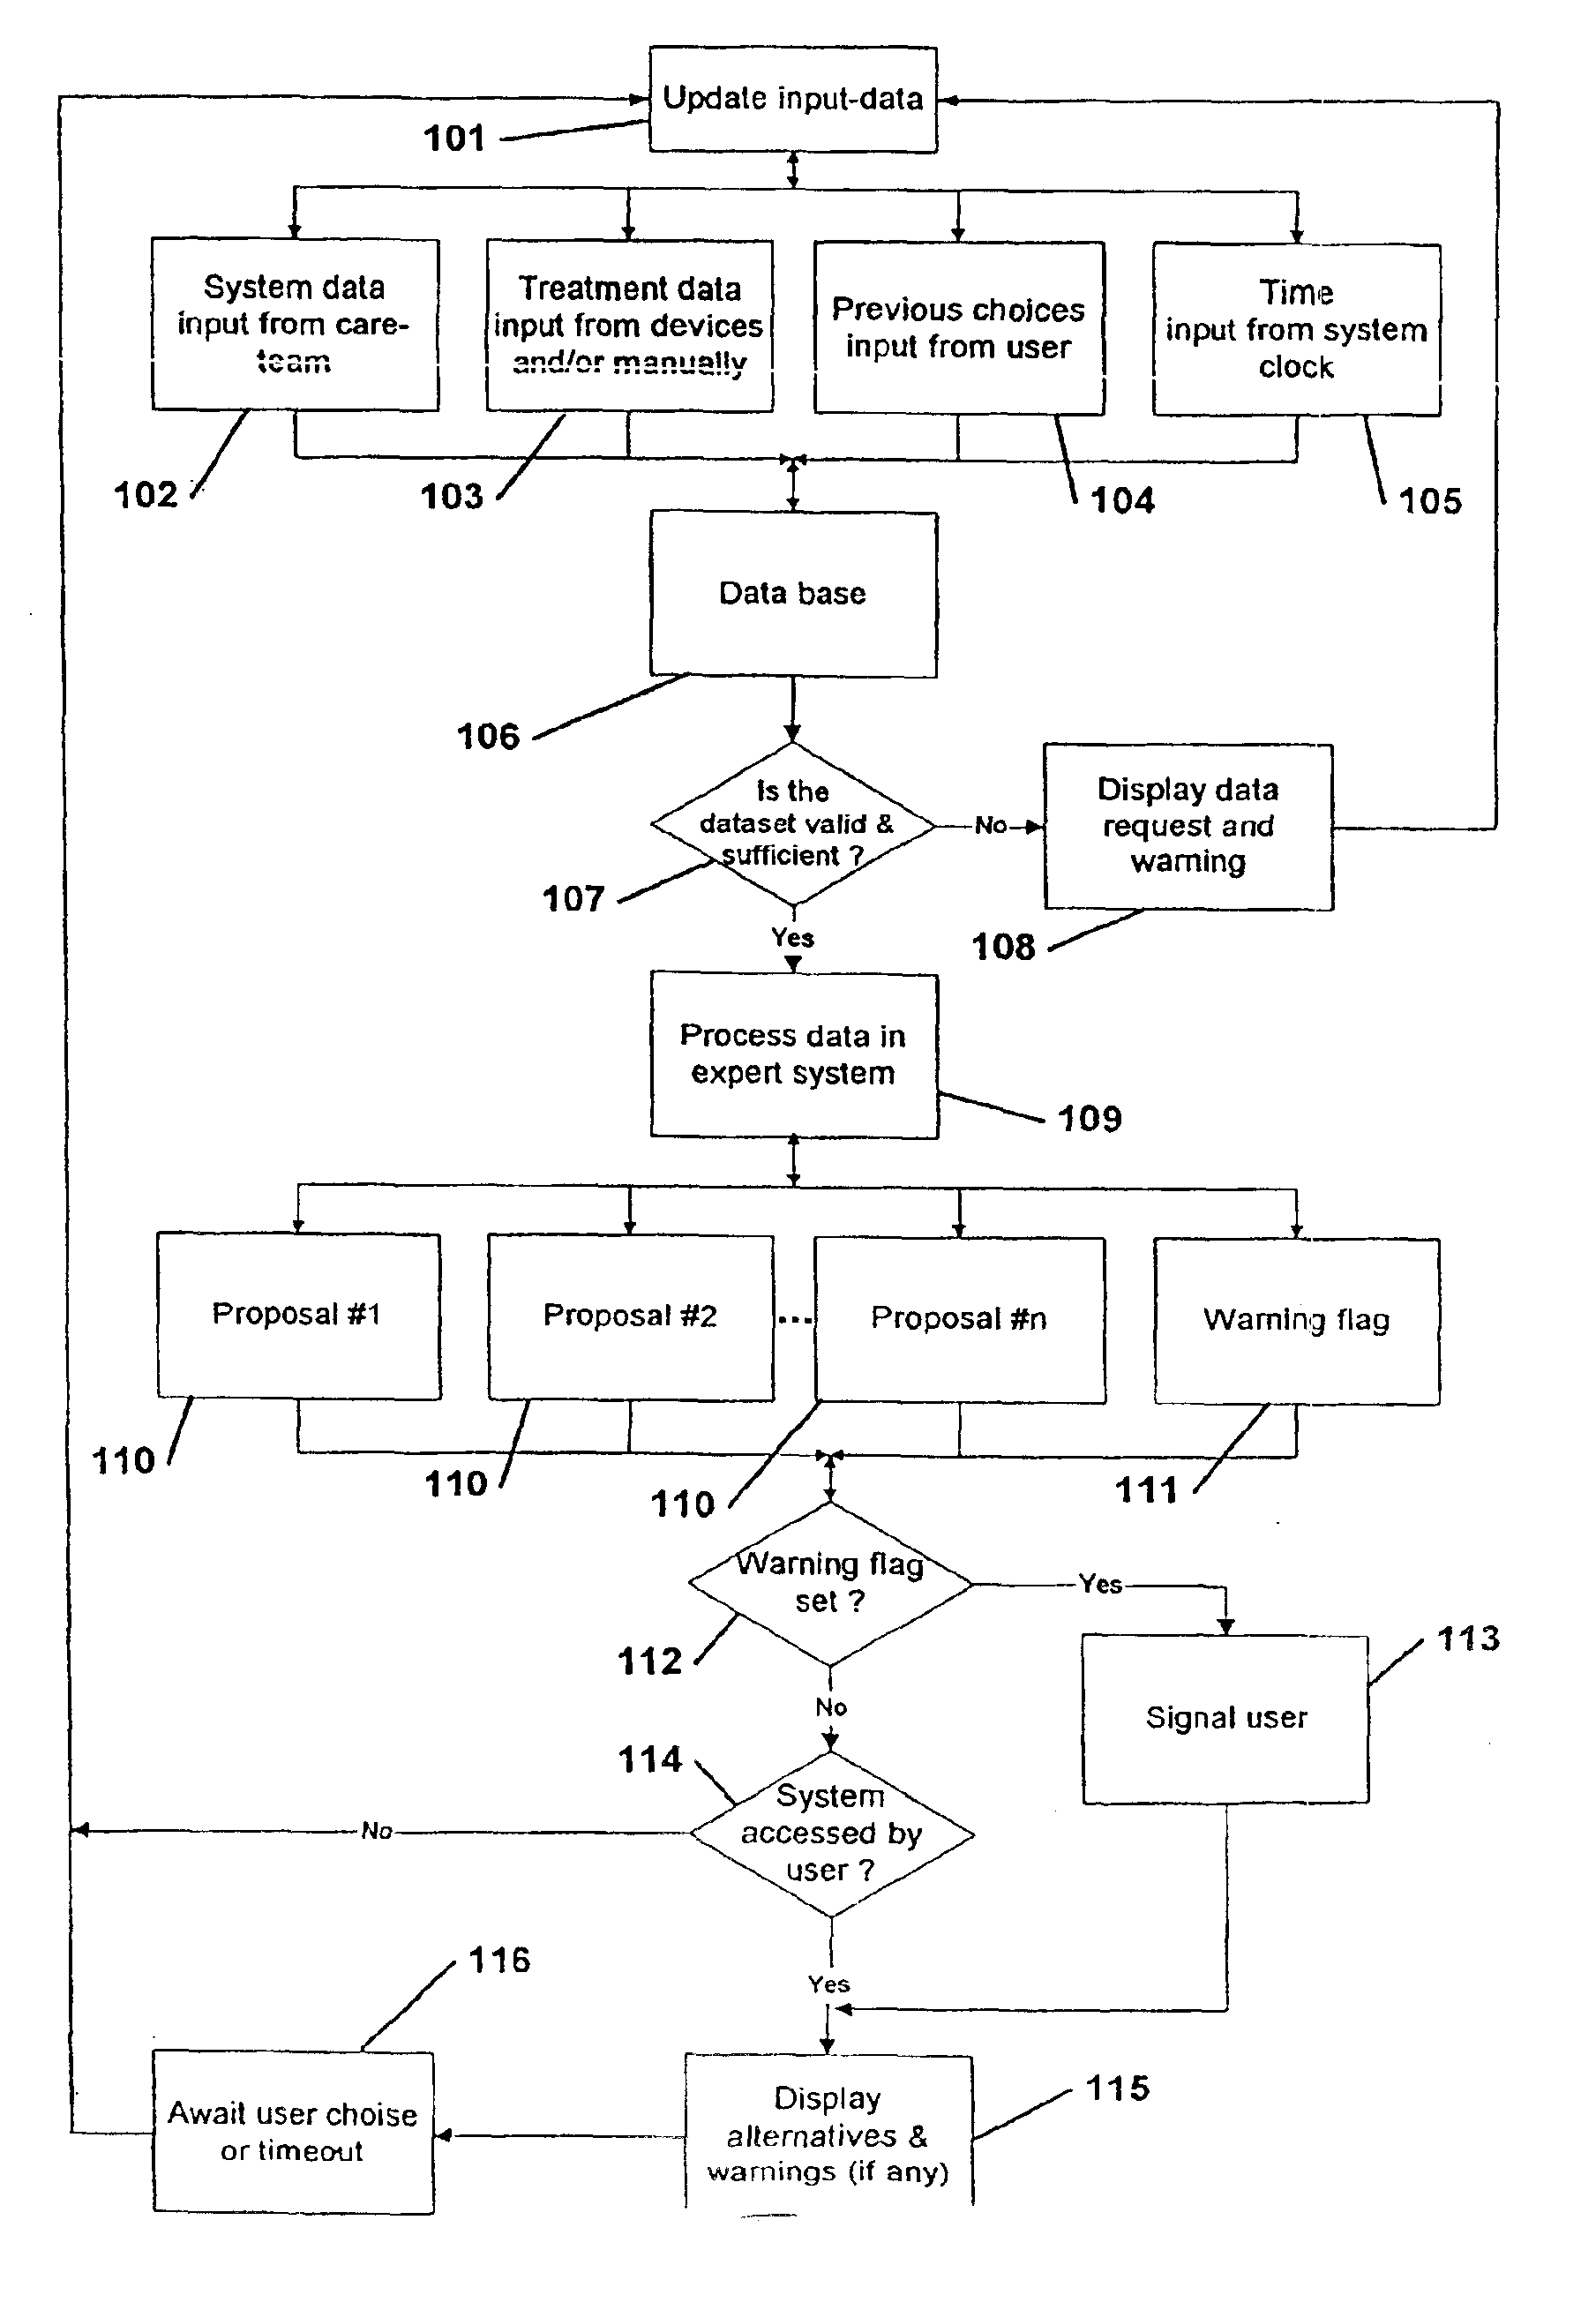 Method and a system for assisting a user in a medical self treatment, said self treatment comprising a plurality of actions